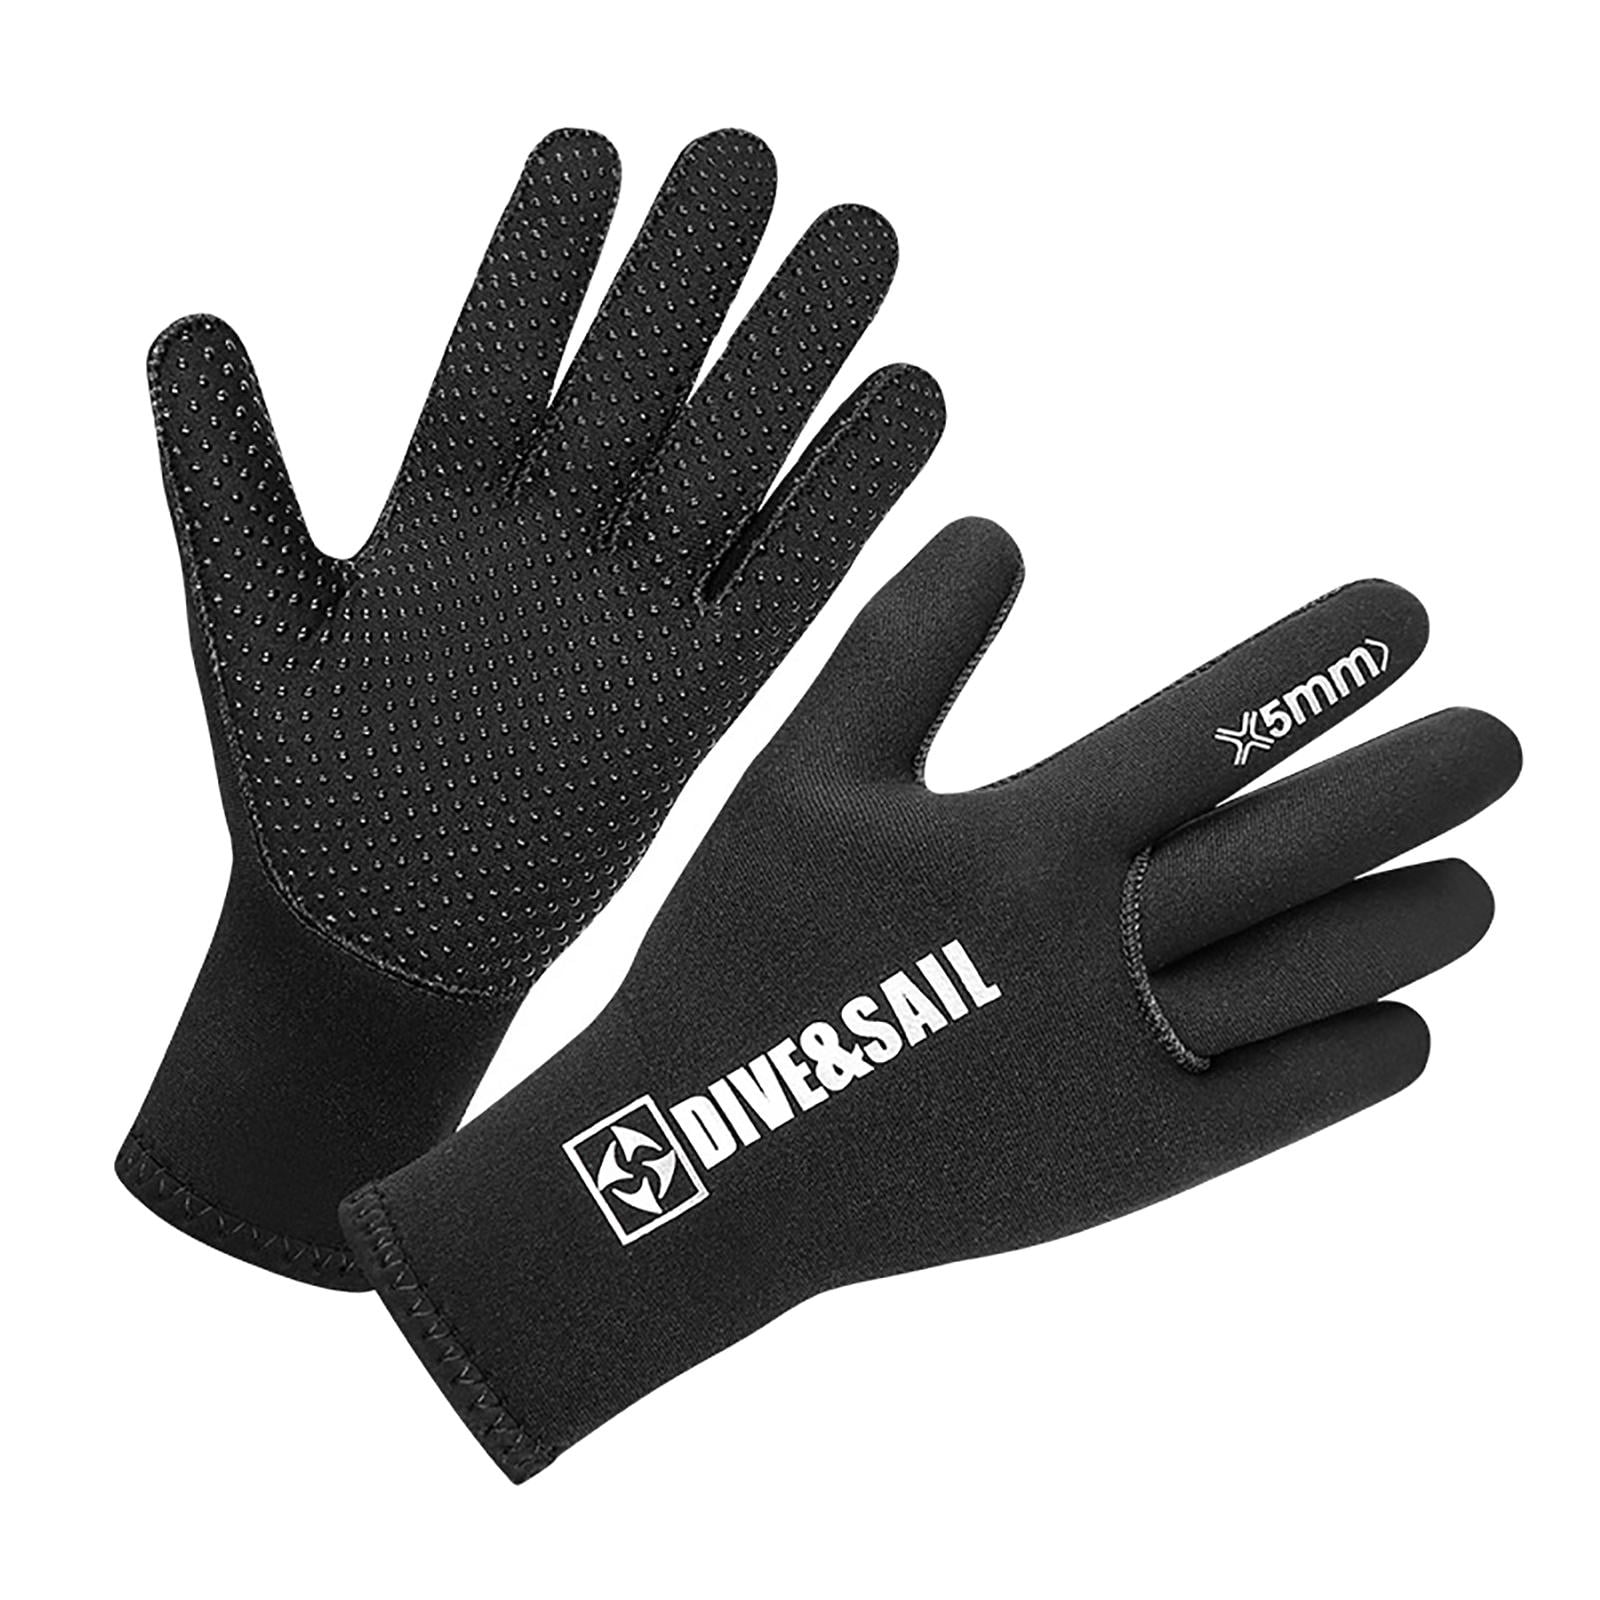 5mm Neoprene Diving Gloves Flexible Stretchy Anti-slip Thermal Wetsuit Glove 